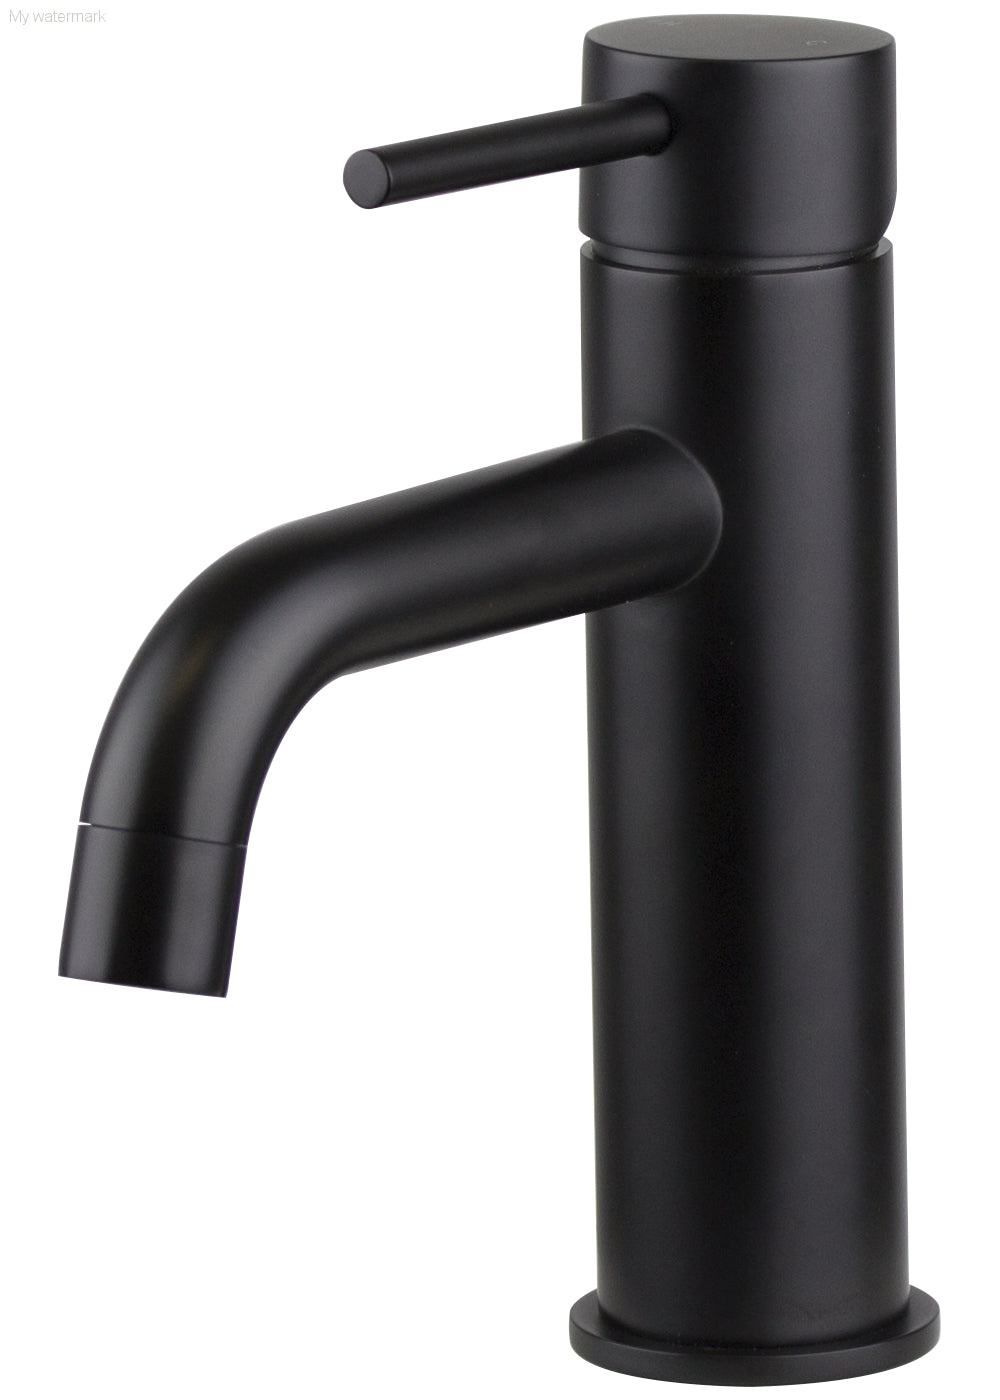 Brasshards Anise Basin Mixer Curved Spout